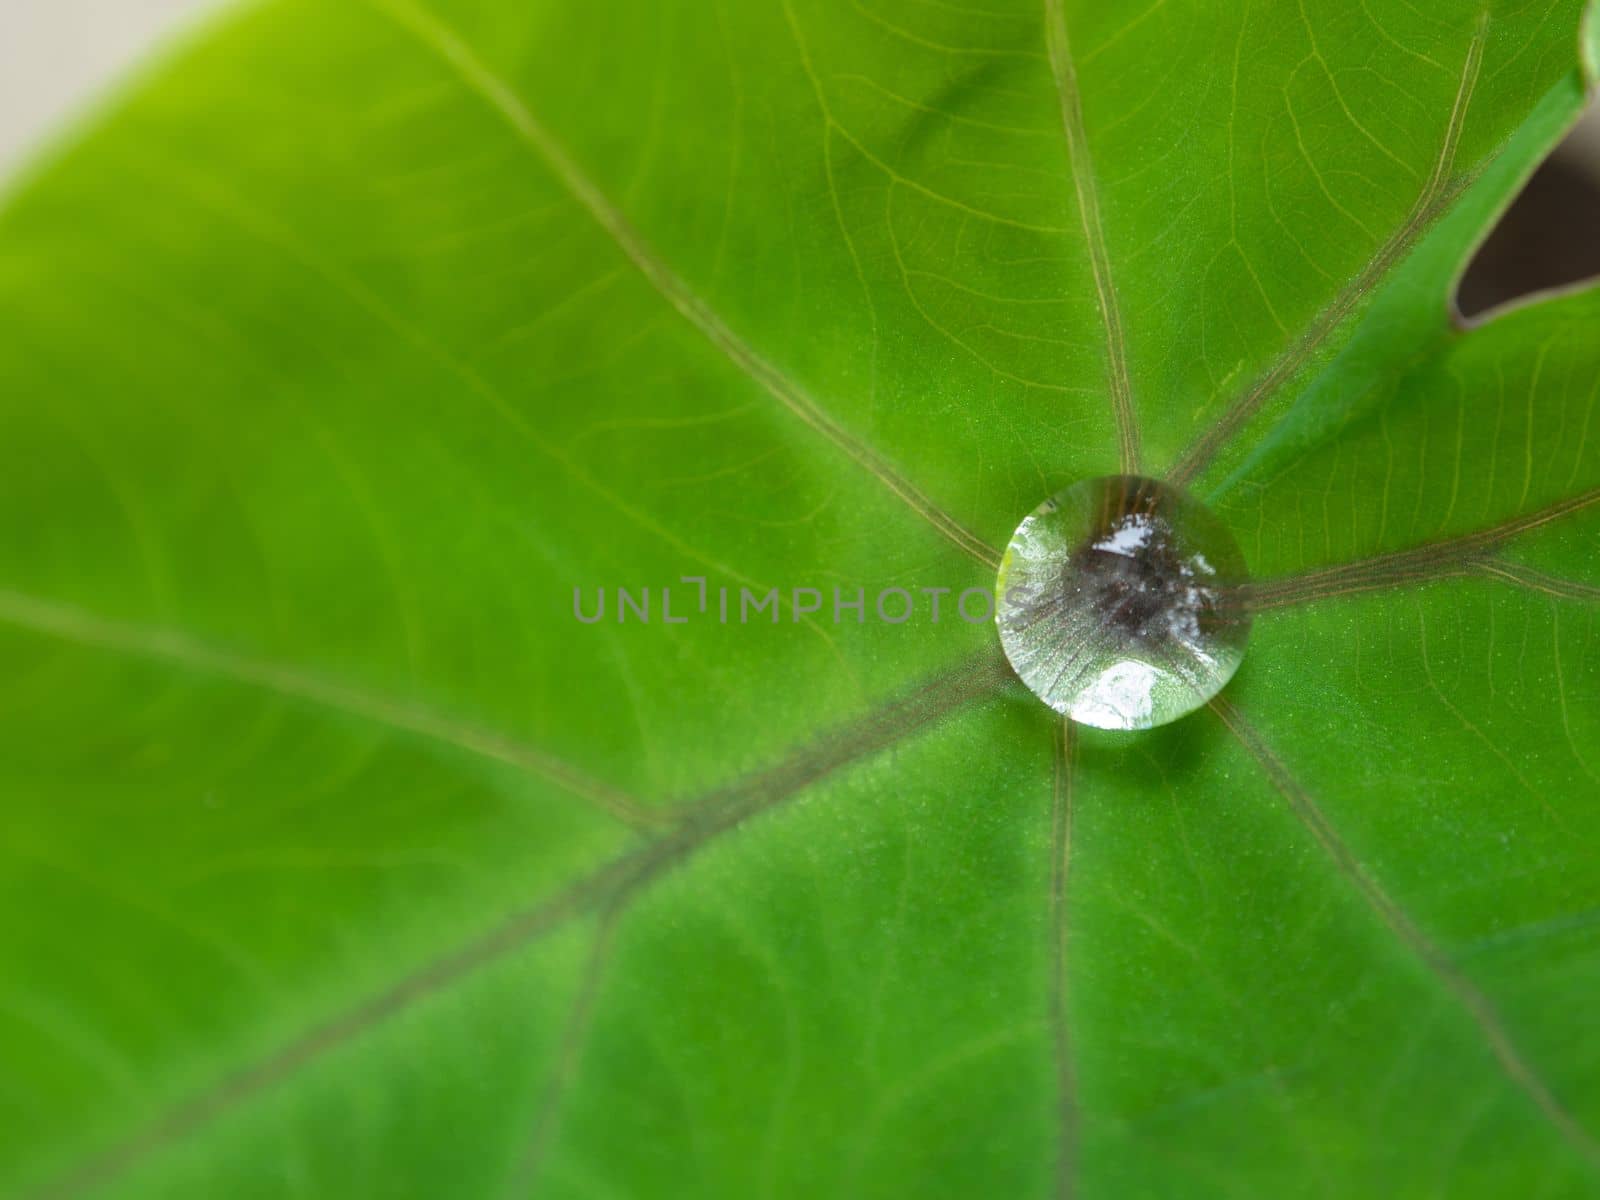 The Droplet water on the colocasia leaf